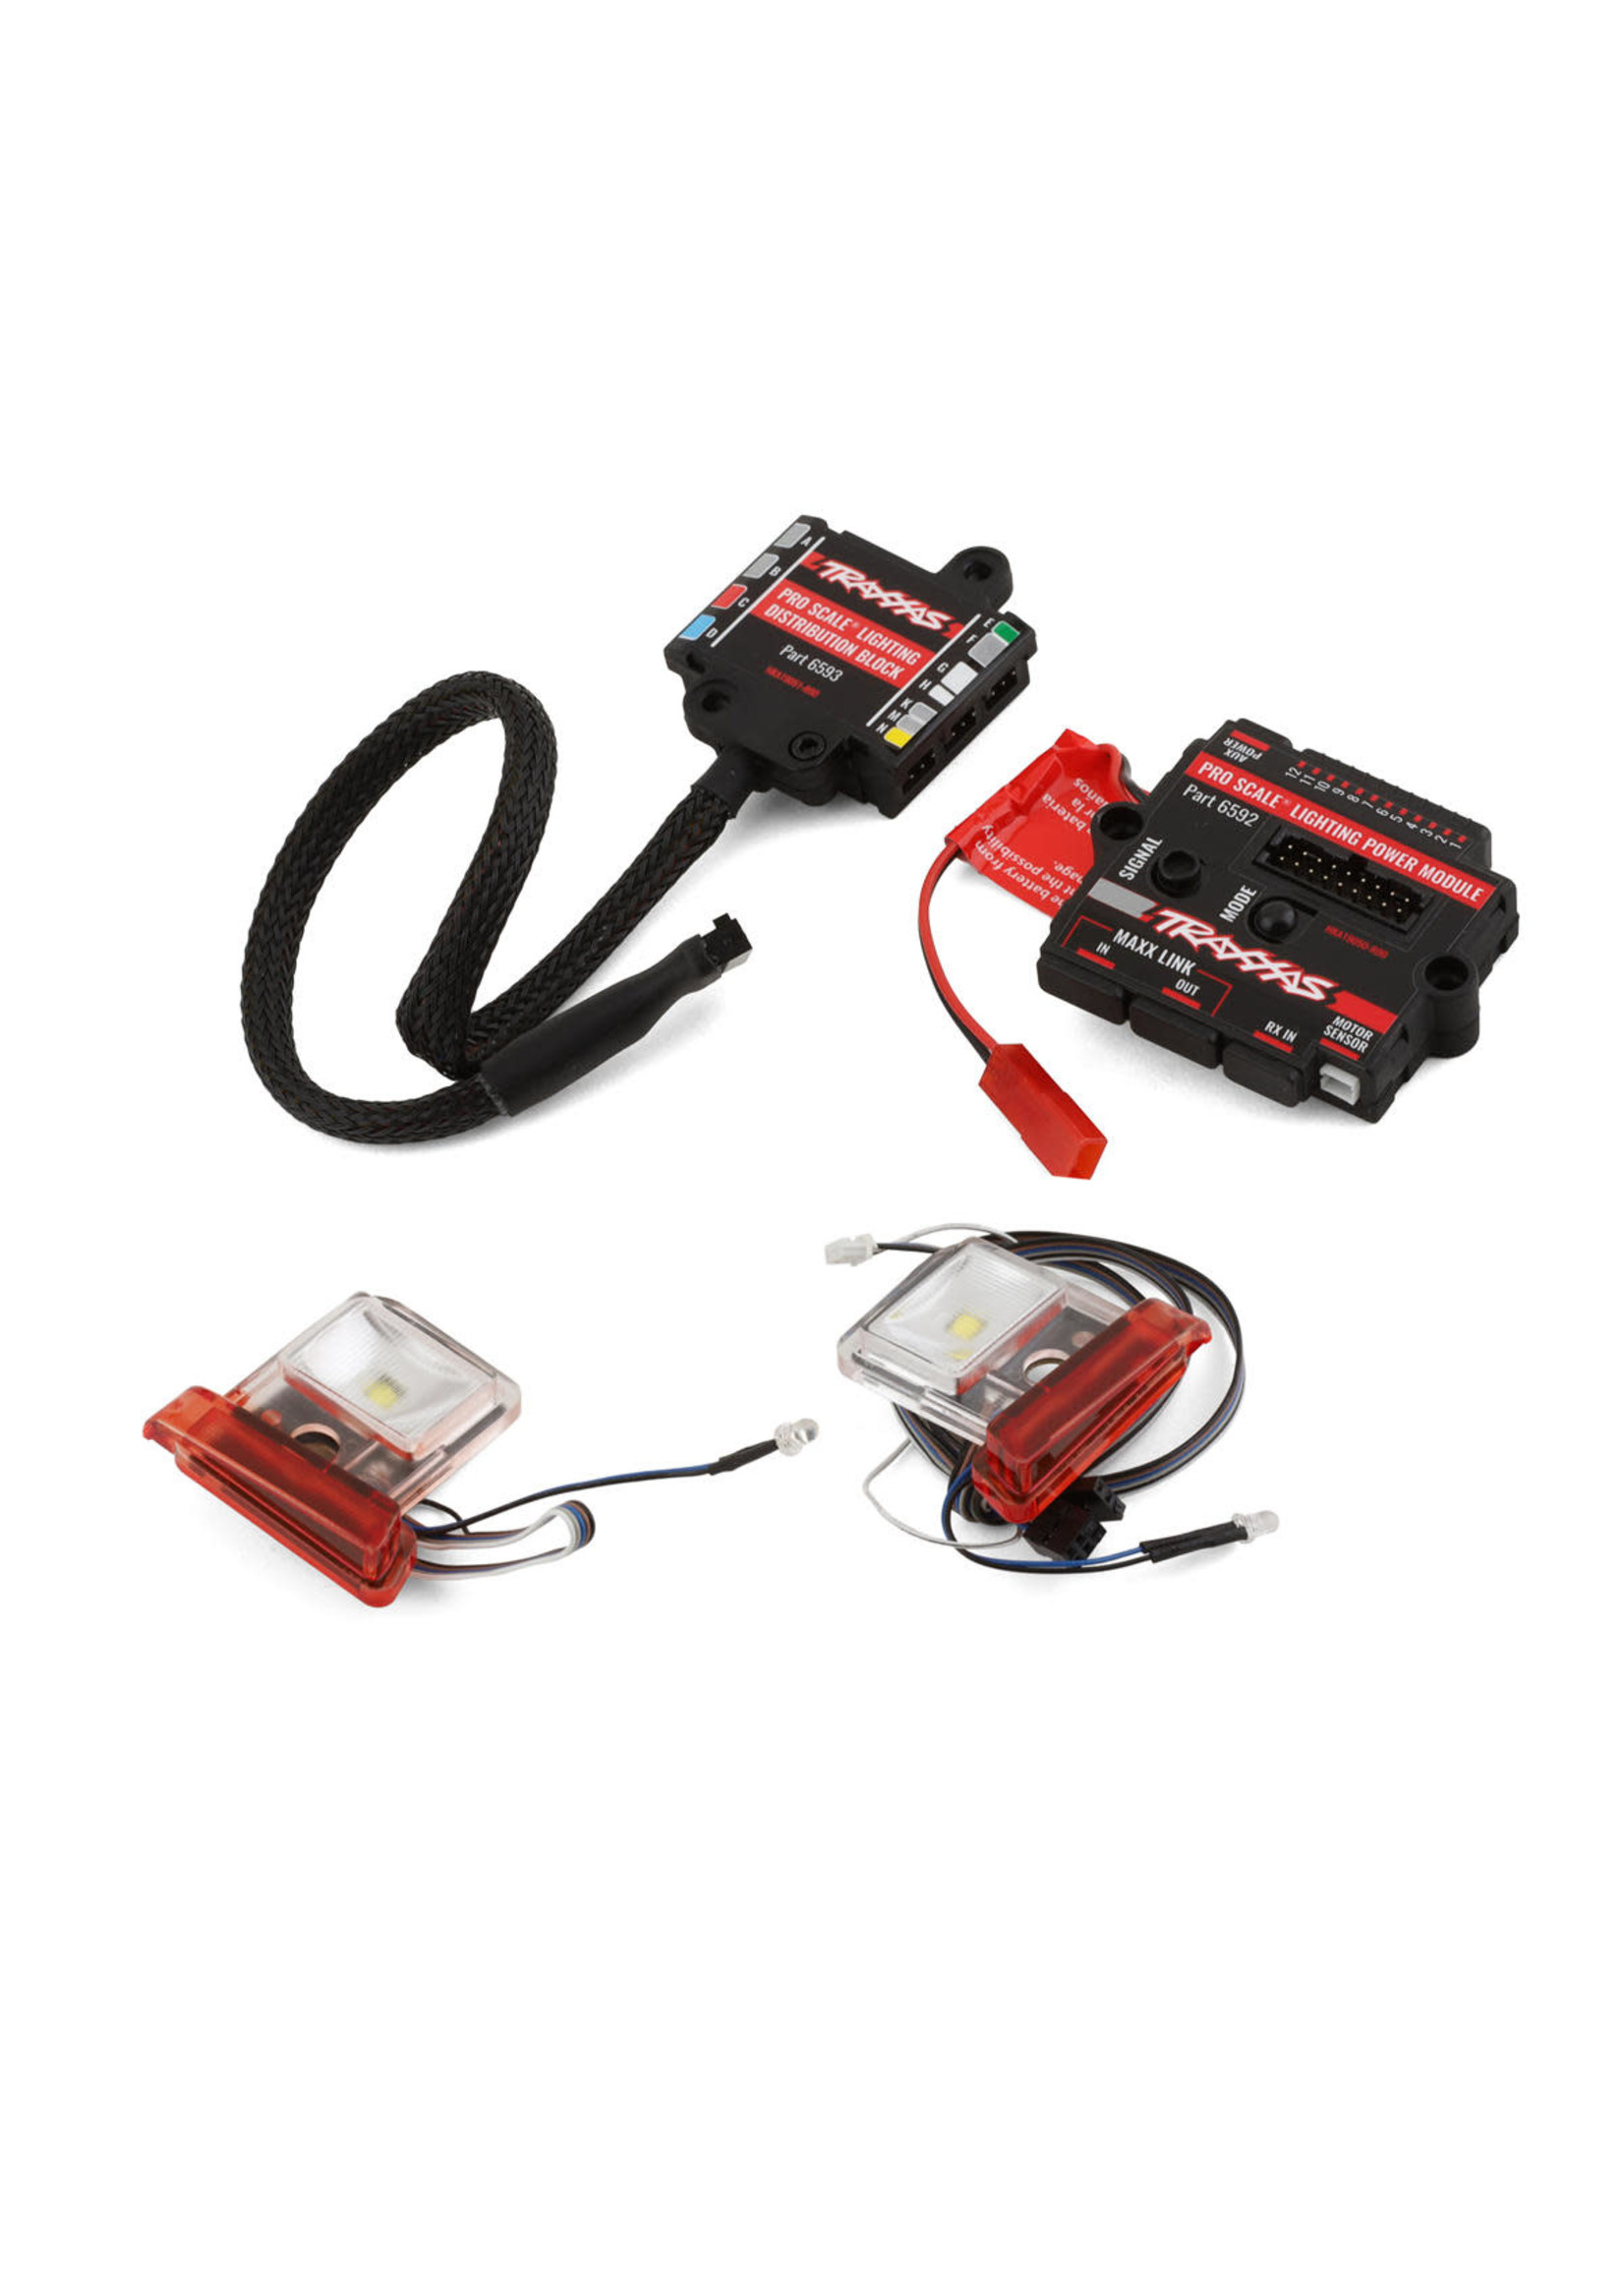 Traxxas Pro Scale® LED light set, TRX-4® Ford Bronco (1979) or Ford F-150 (1979), complete with power module (contains headlights, tail lights, side marker lights, & distribution block) (fits #8010 or 9230 series bodies)